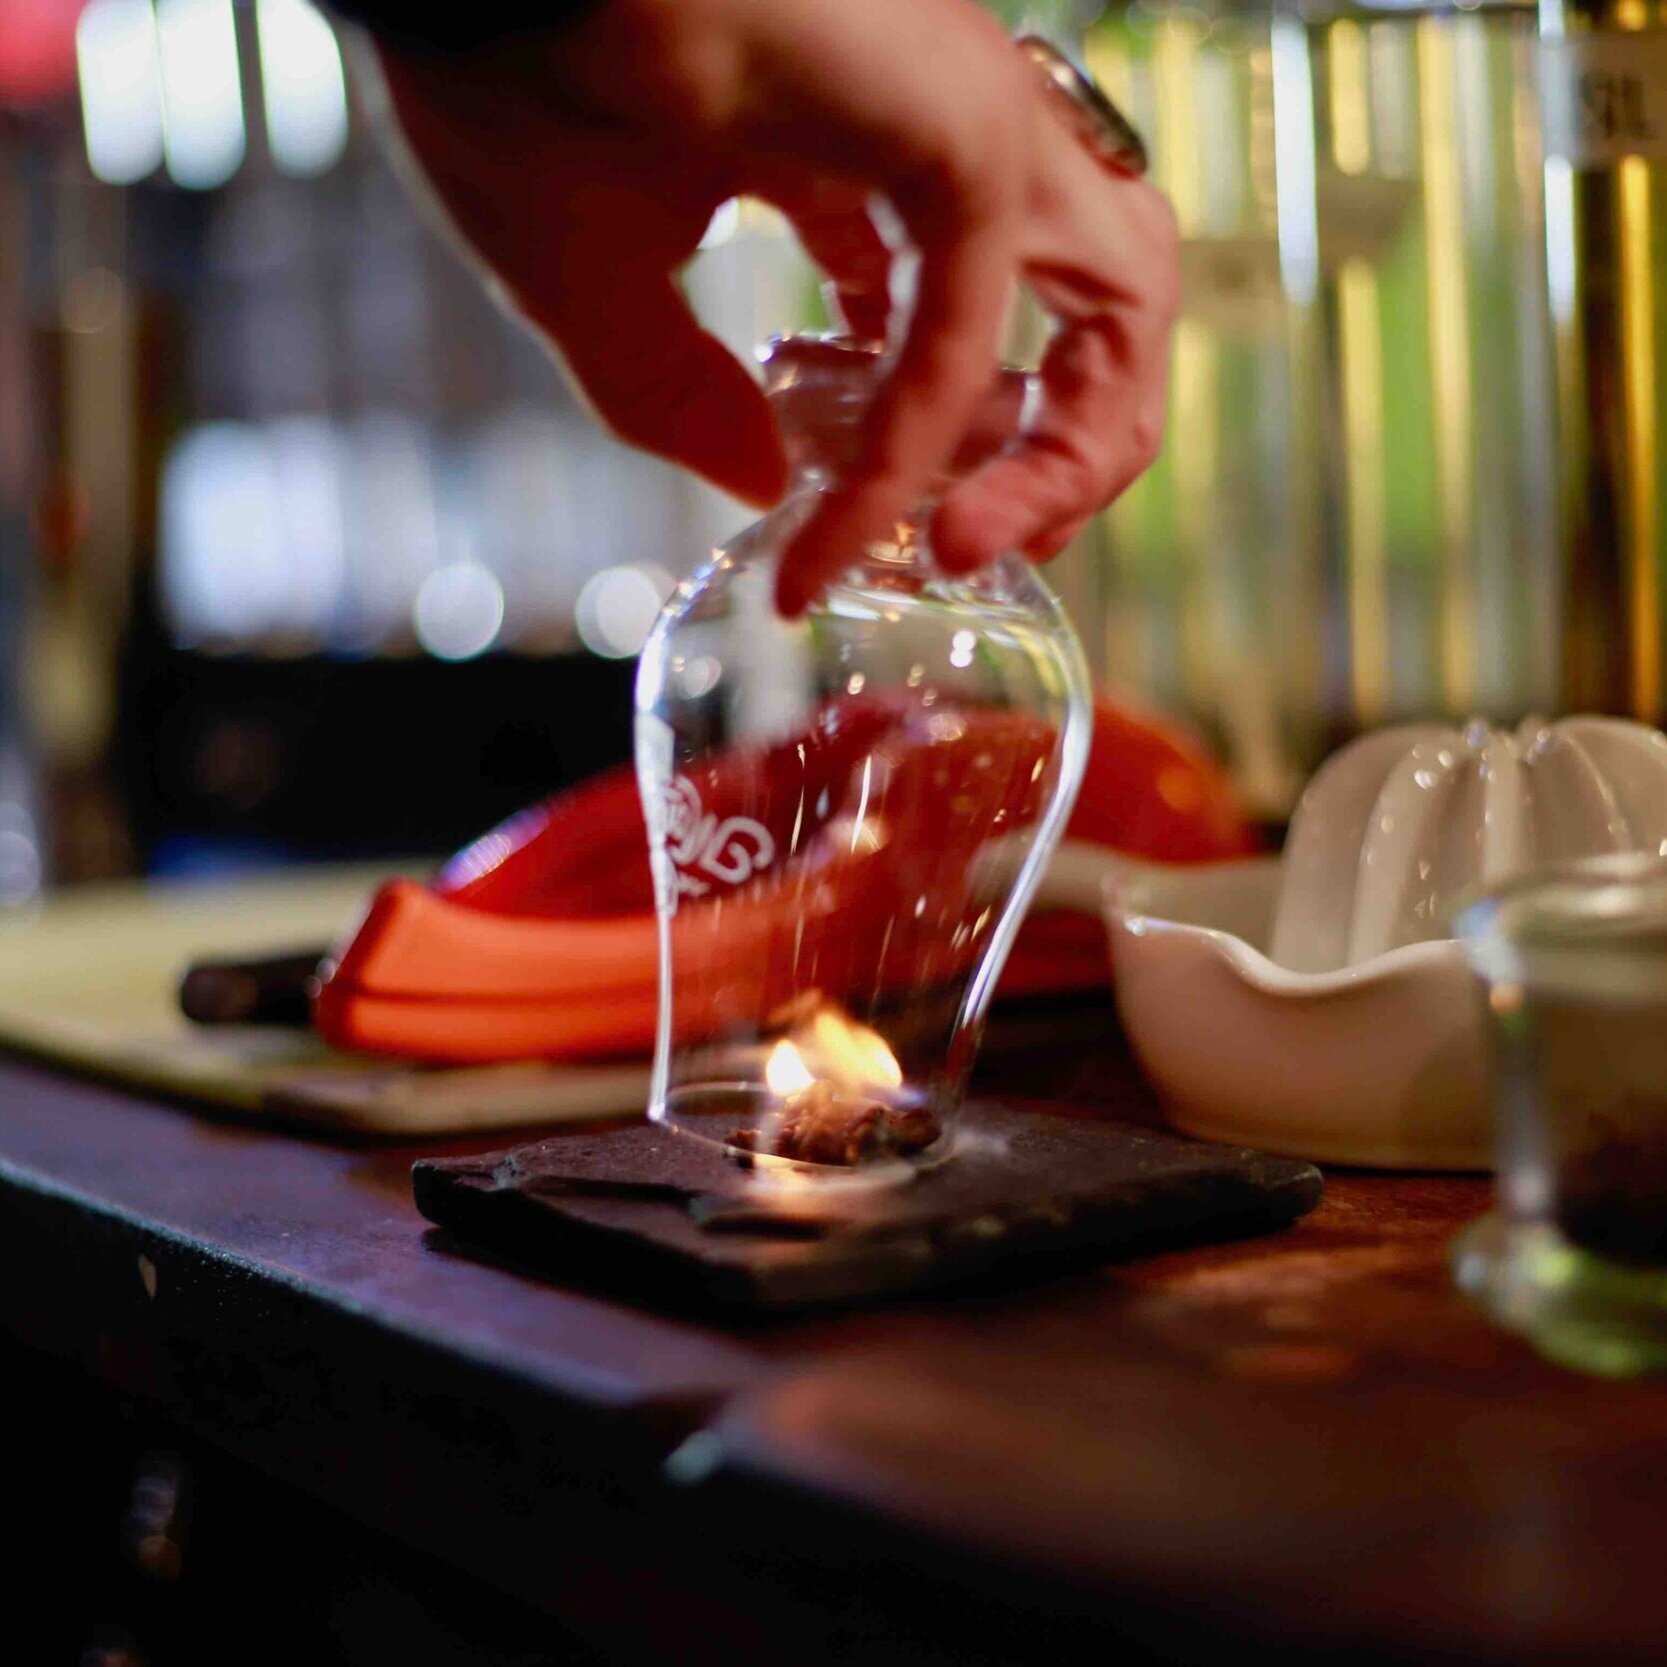 Montanya bartender places a glass over burning cloves to make the Smokeshow cocktail.